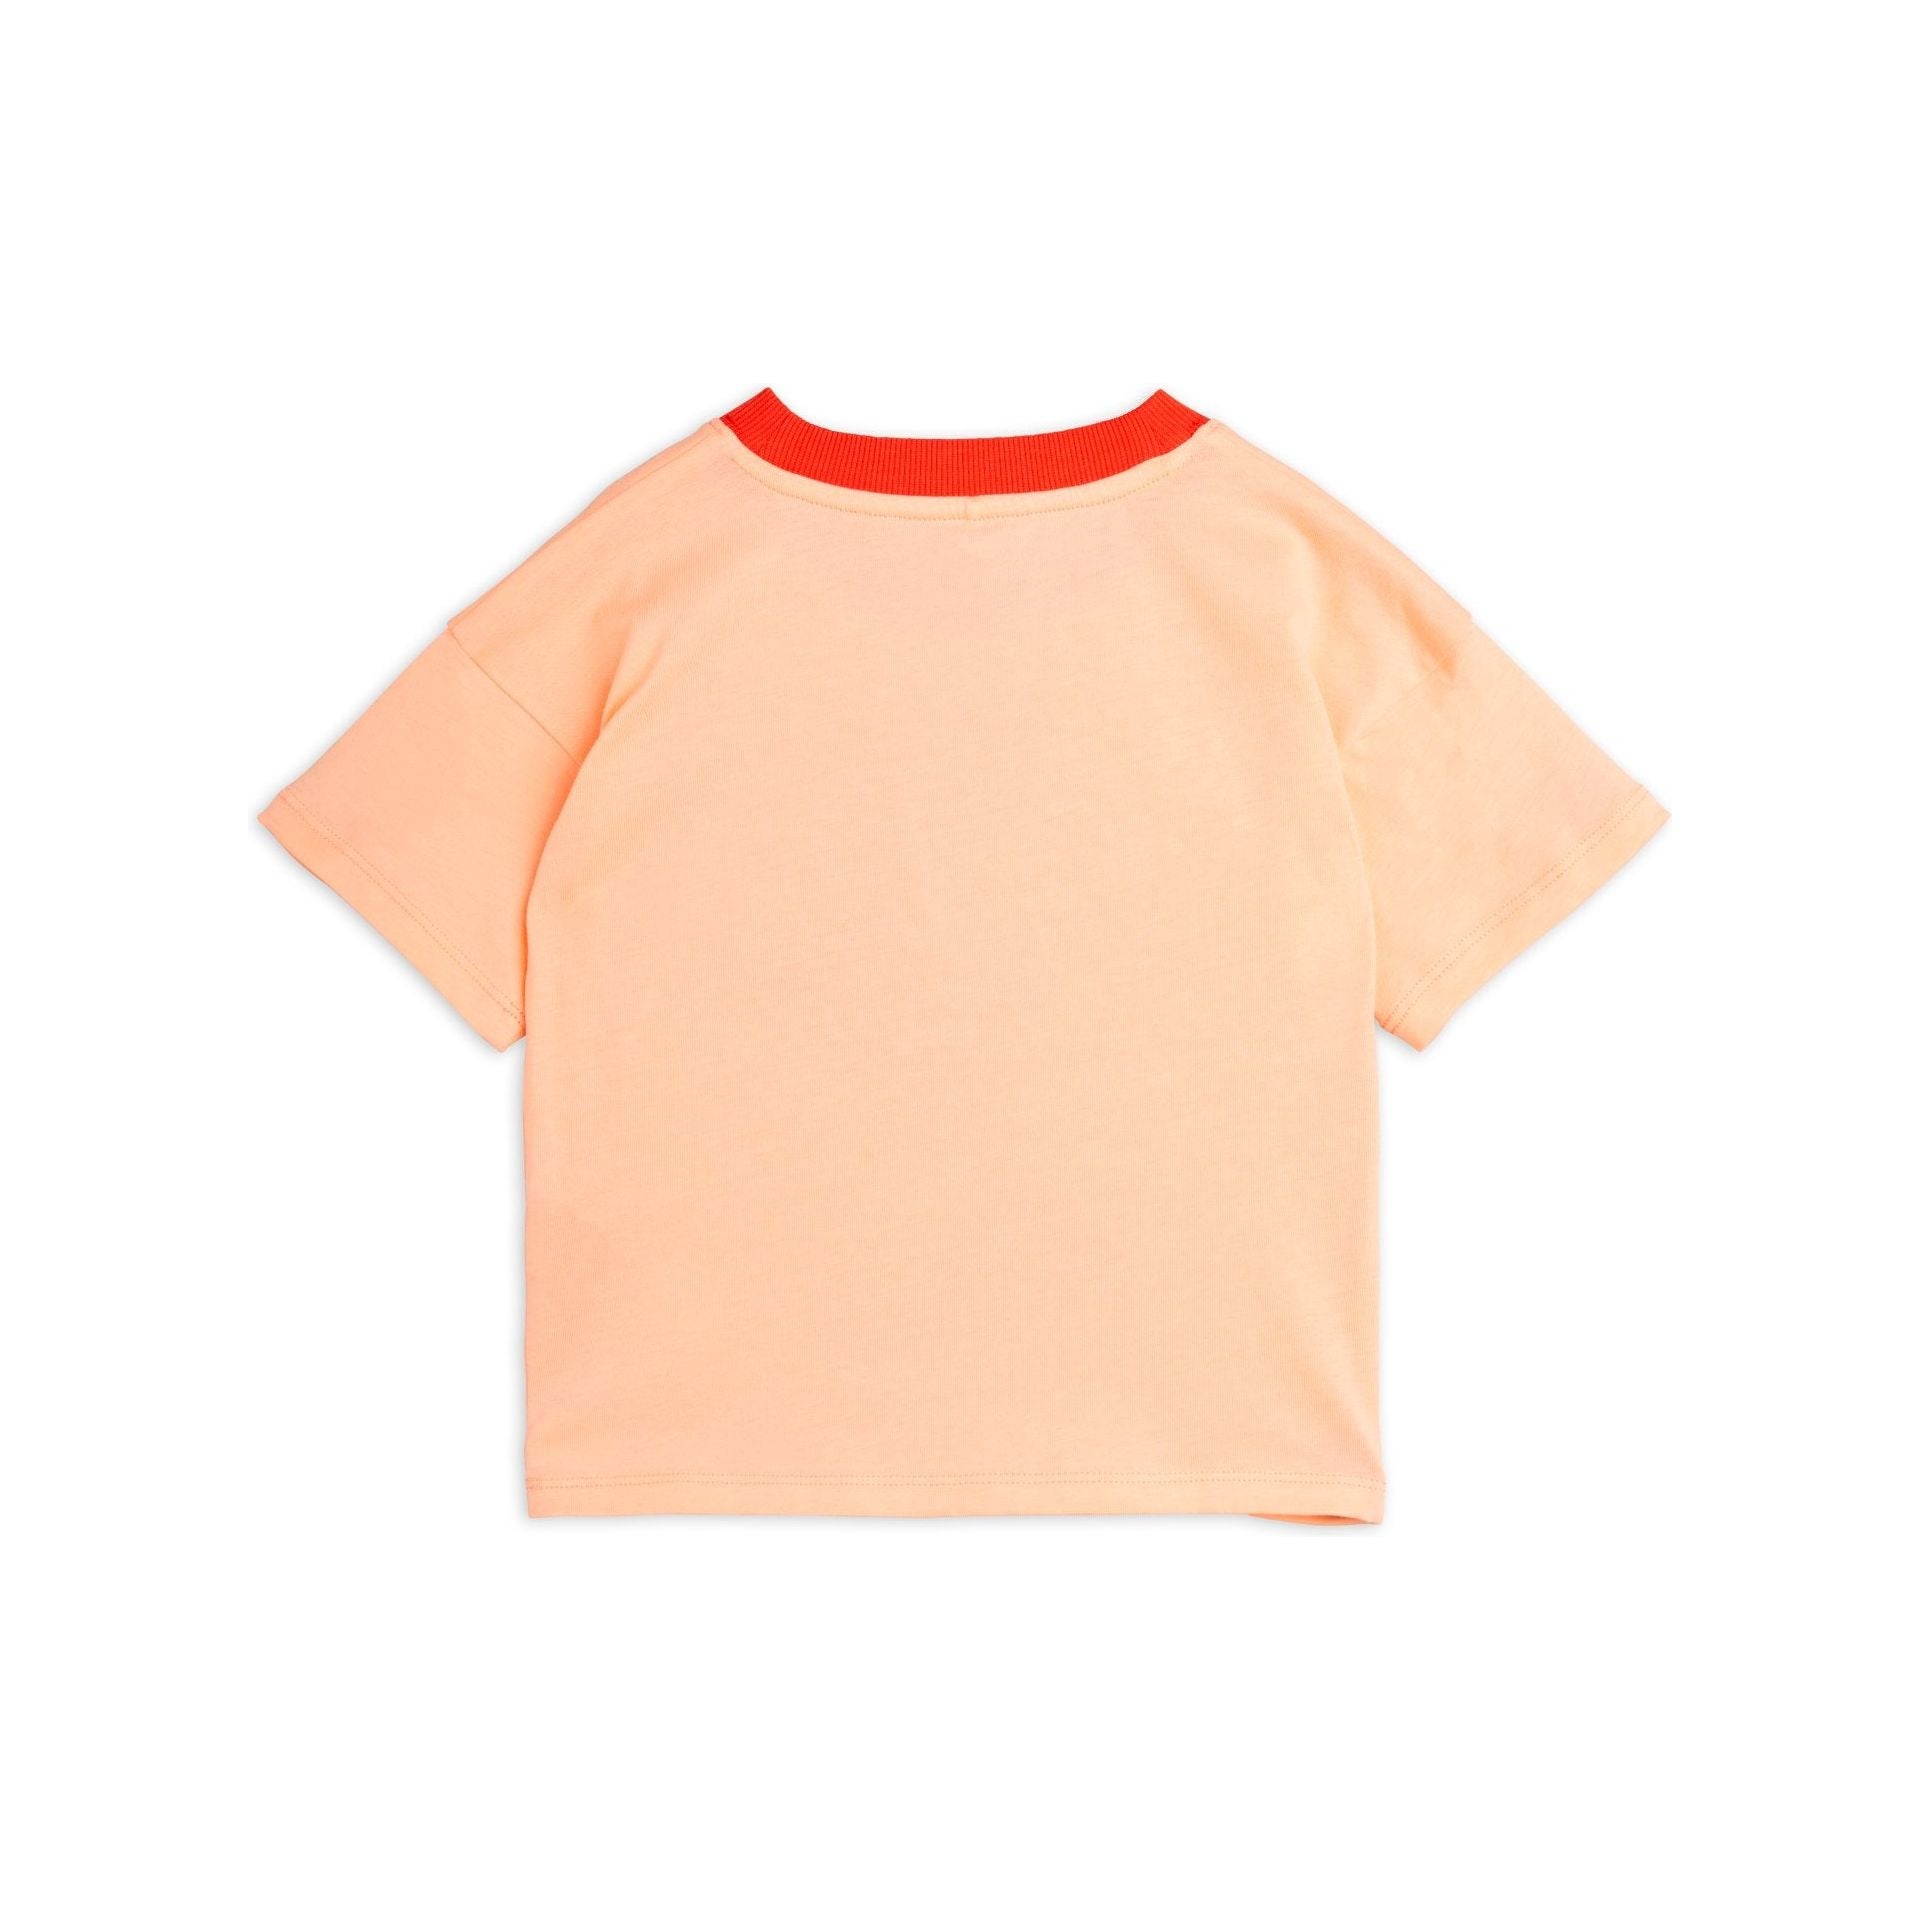 Dolphin Sp Ss Tee - Red